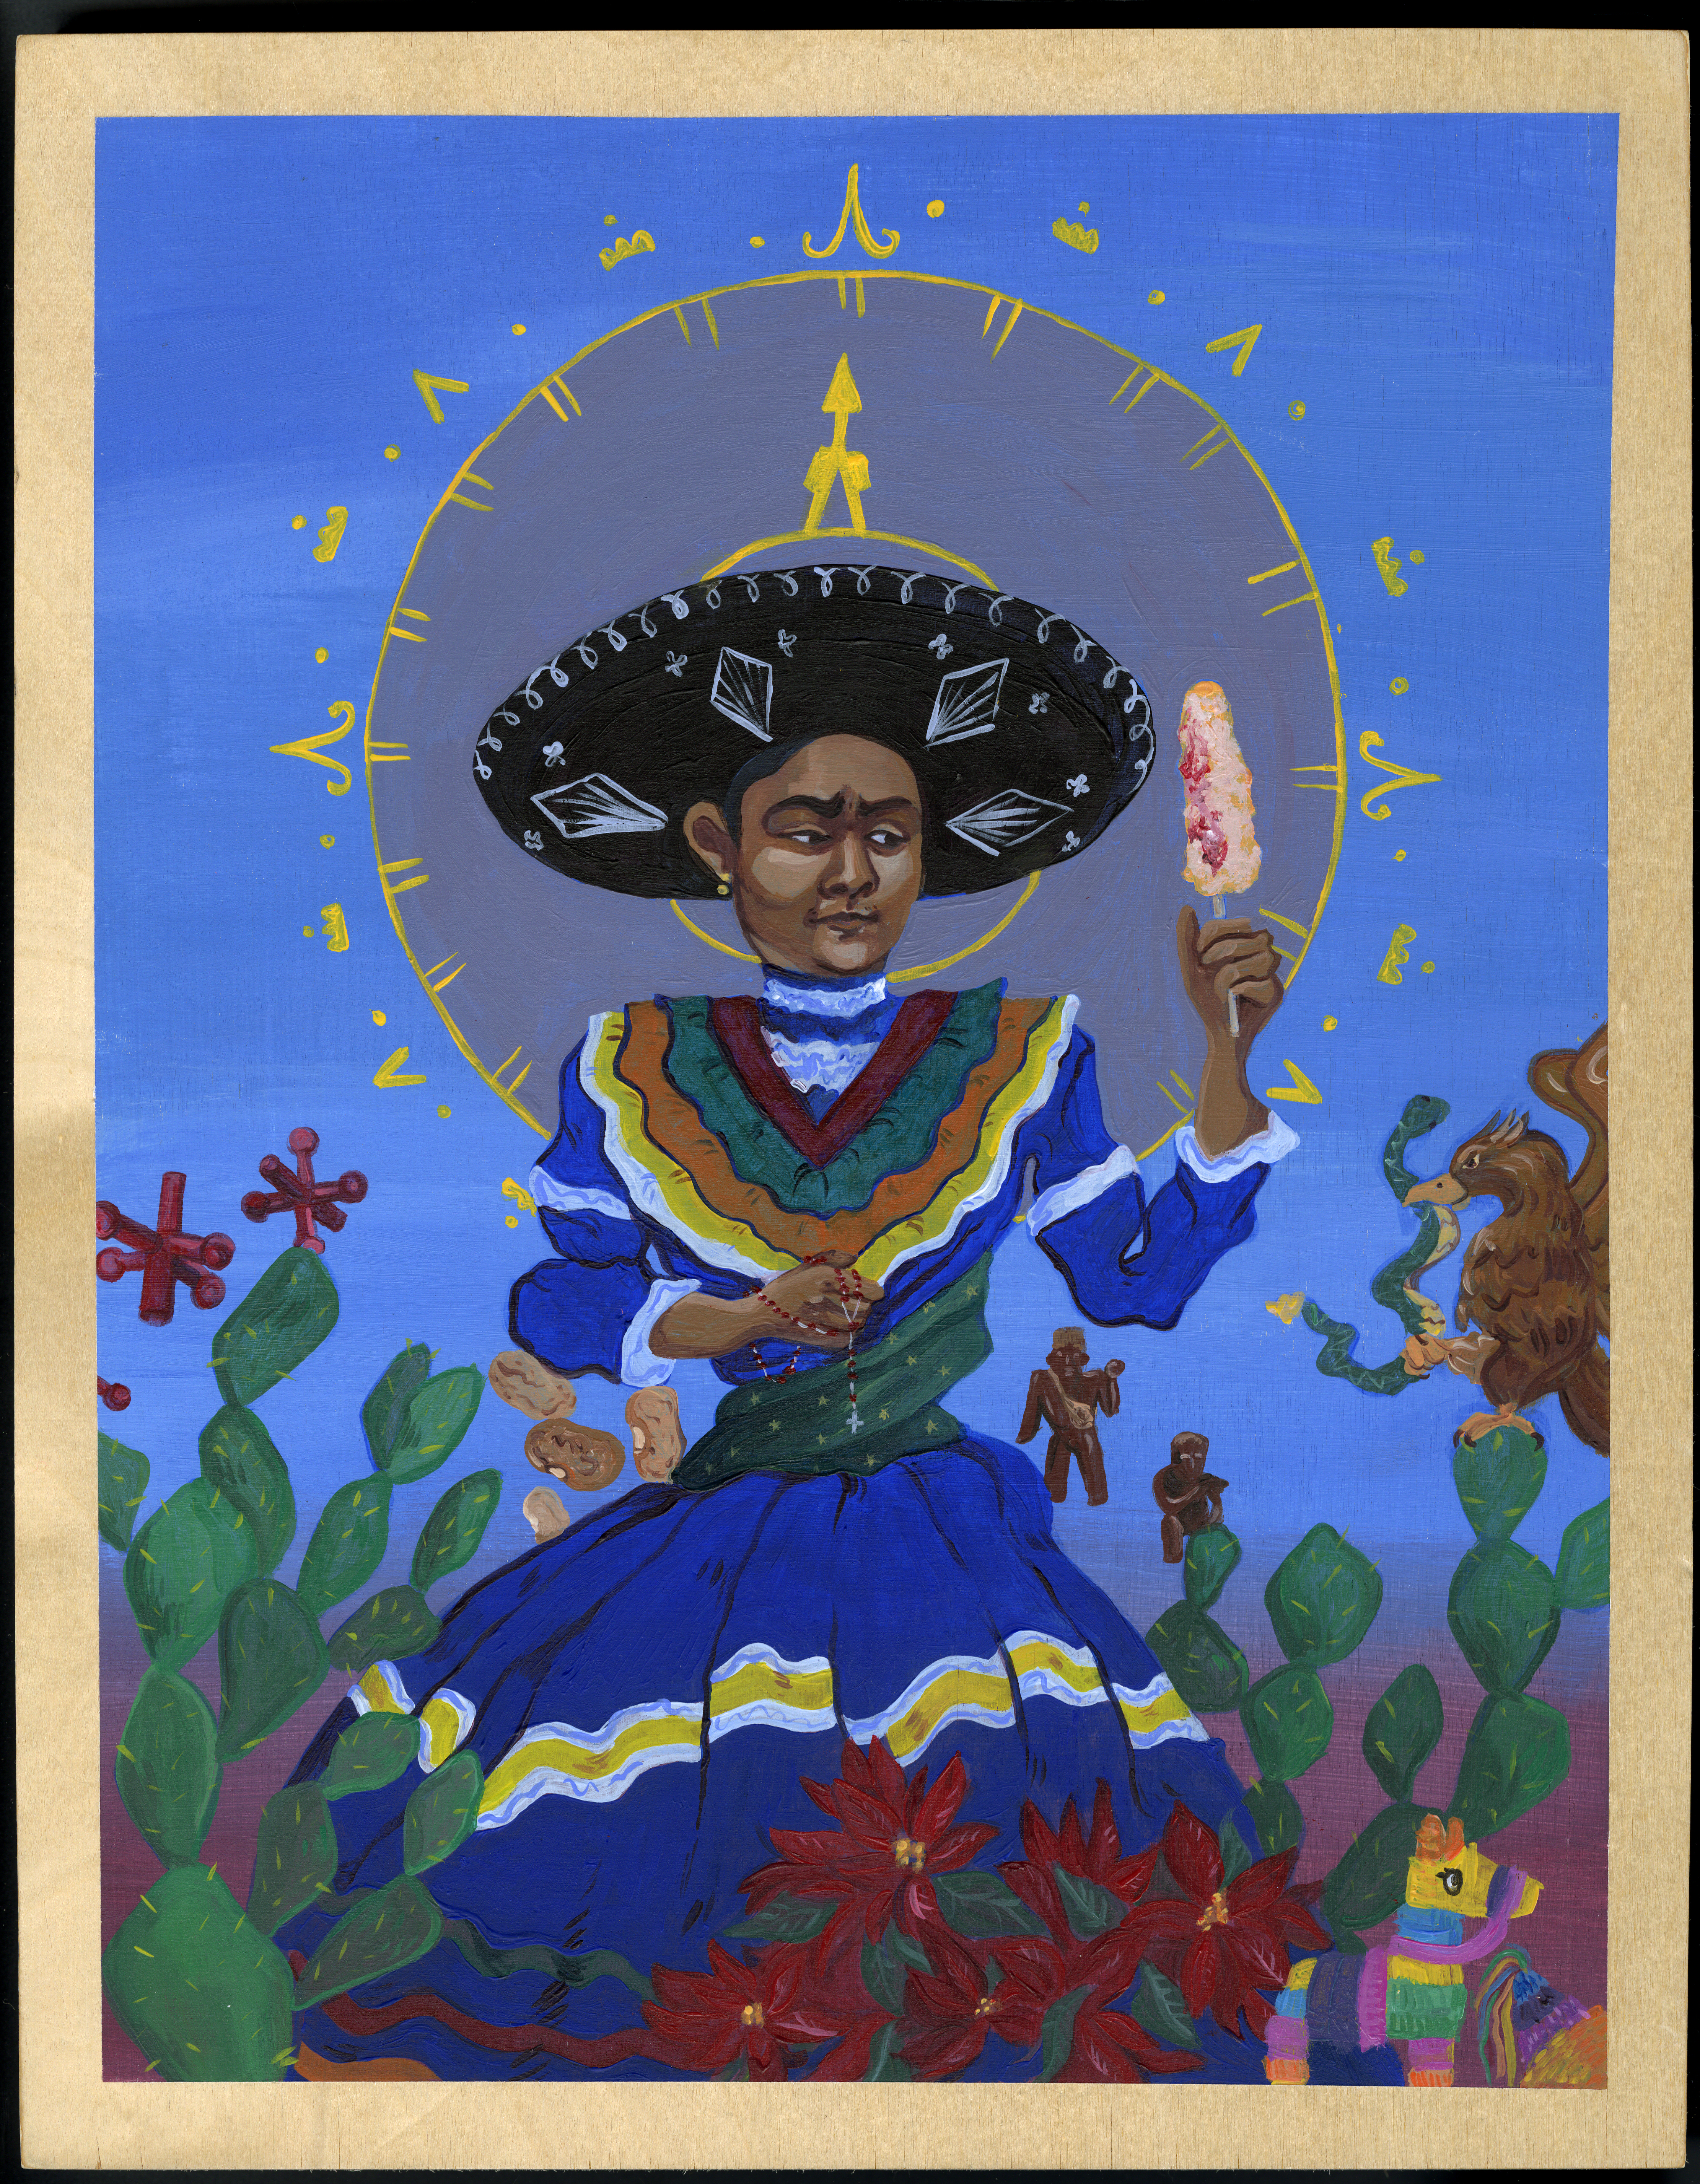 Painting of an individual wearing a blue dress and mariachi hat surrounded by traditional Mexican symbols. There are cacti, a piñata, pinto beans, a snake, etc.